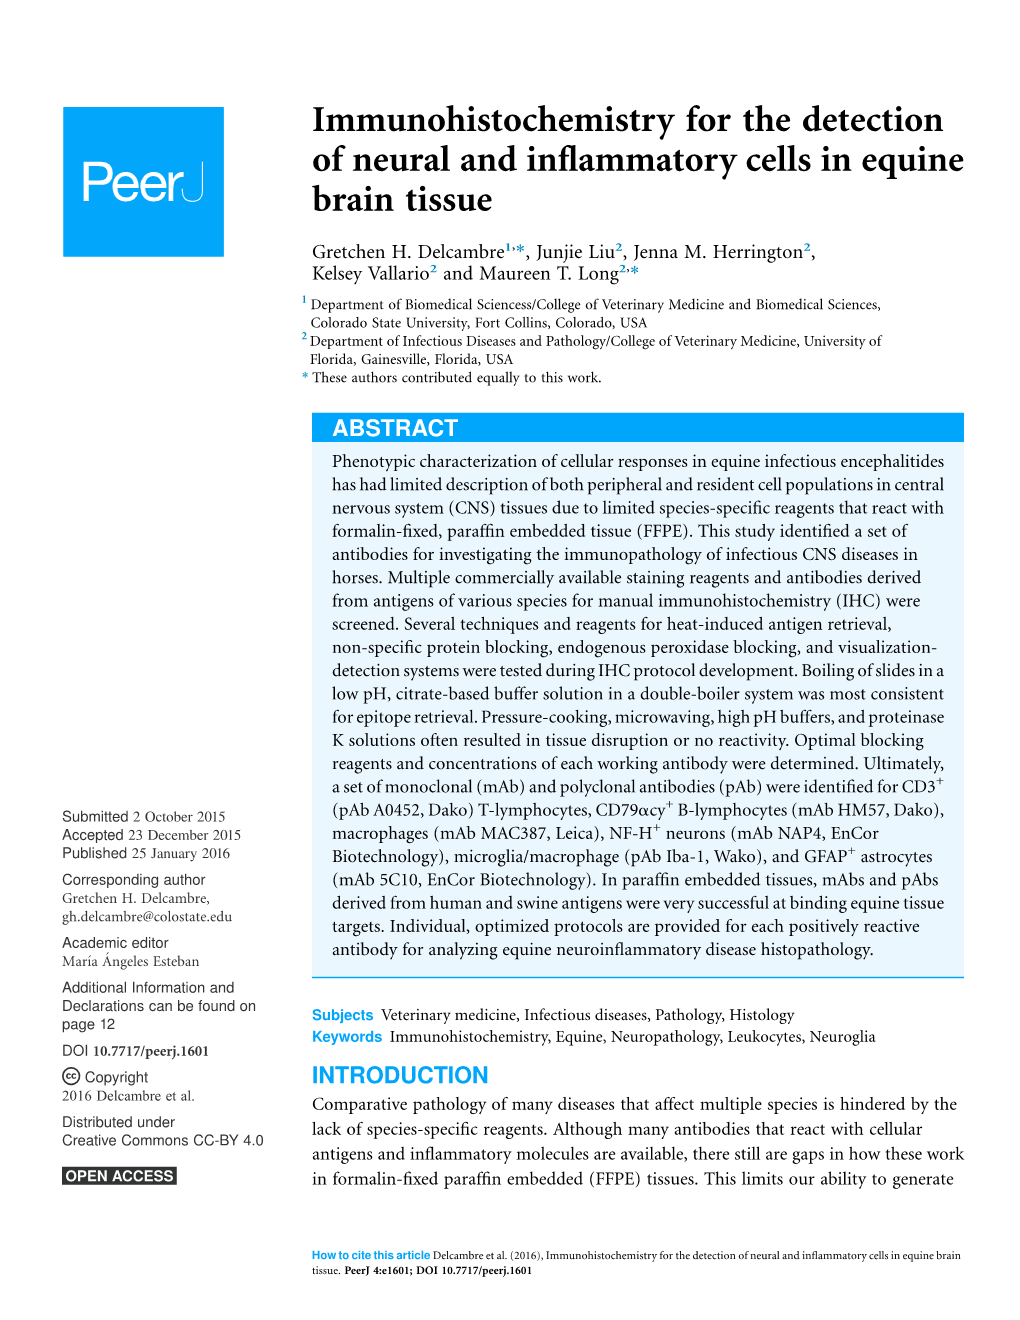 Immunohistochemistry for the Detection of Neural and Inflammatory Cells in Equine Brain Tissue